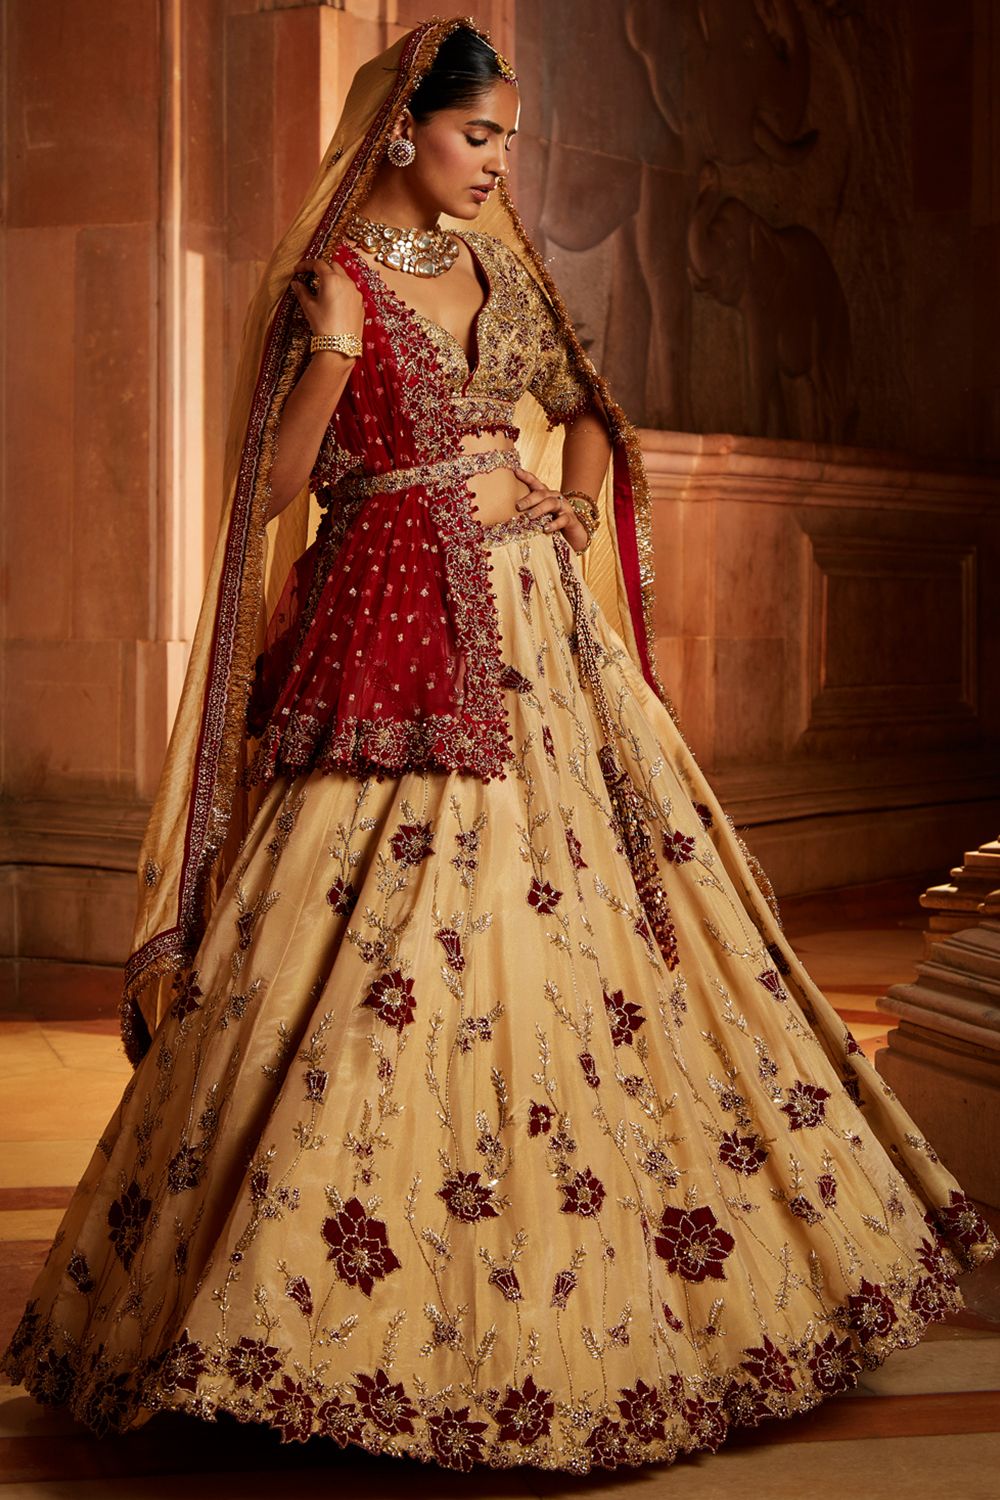 Gold Tissue Lehenga Choli And Belt With Cotrasting Red Tulle Dupatta And Optional Gold Tissue Second Dupatta